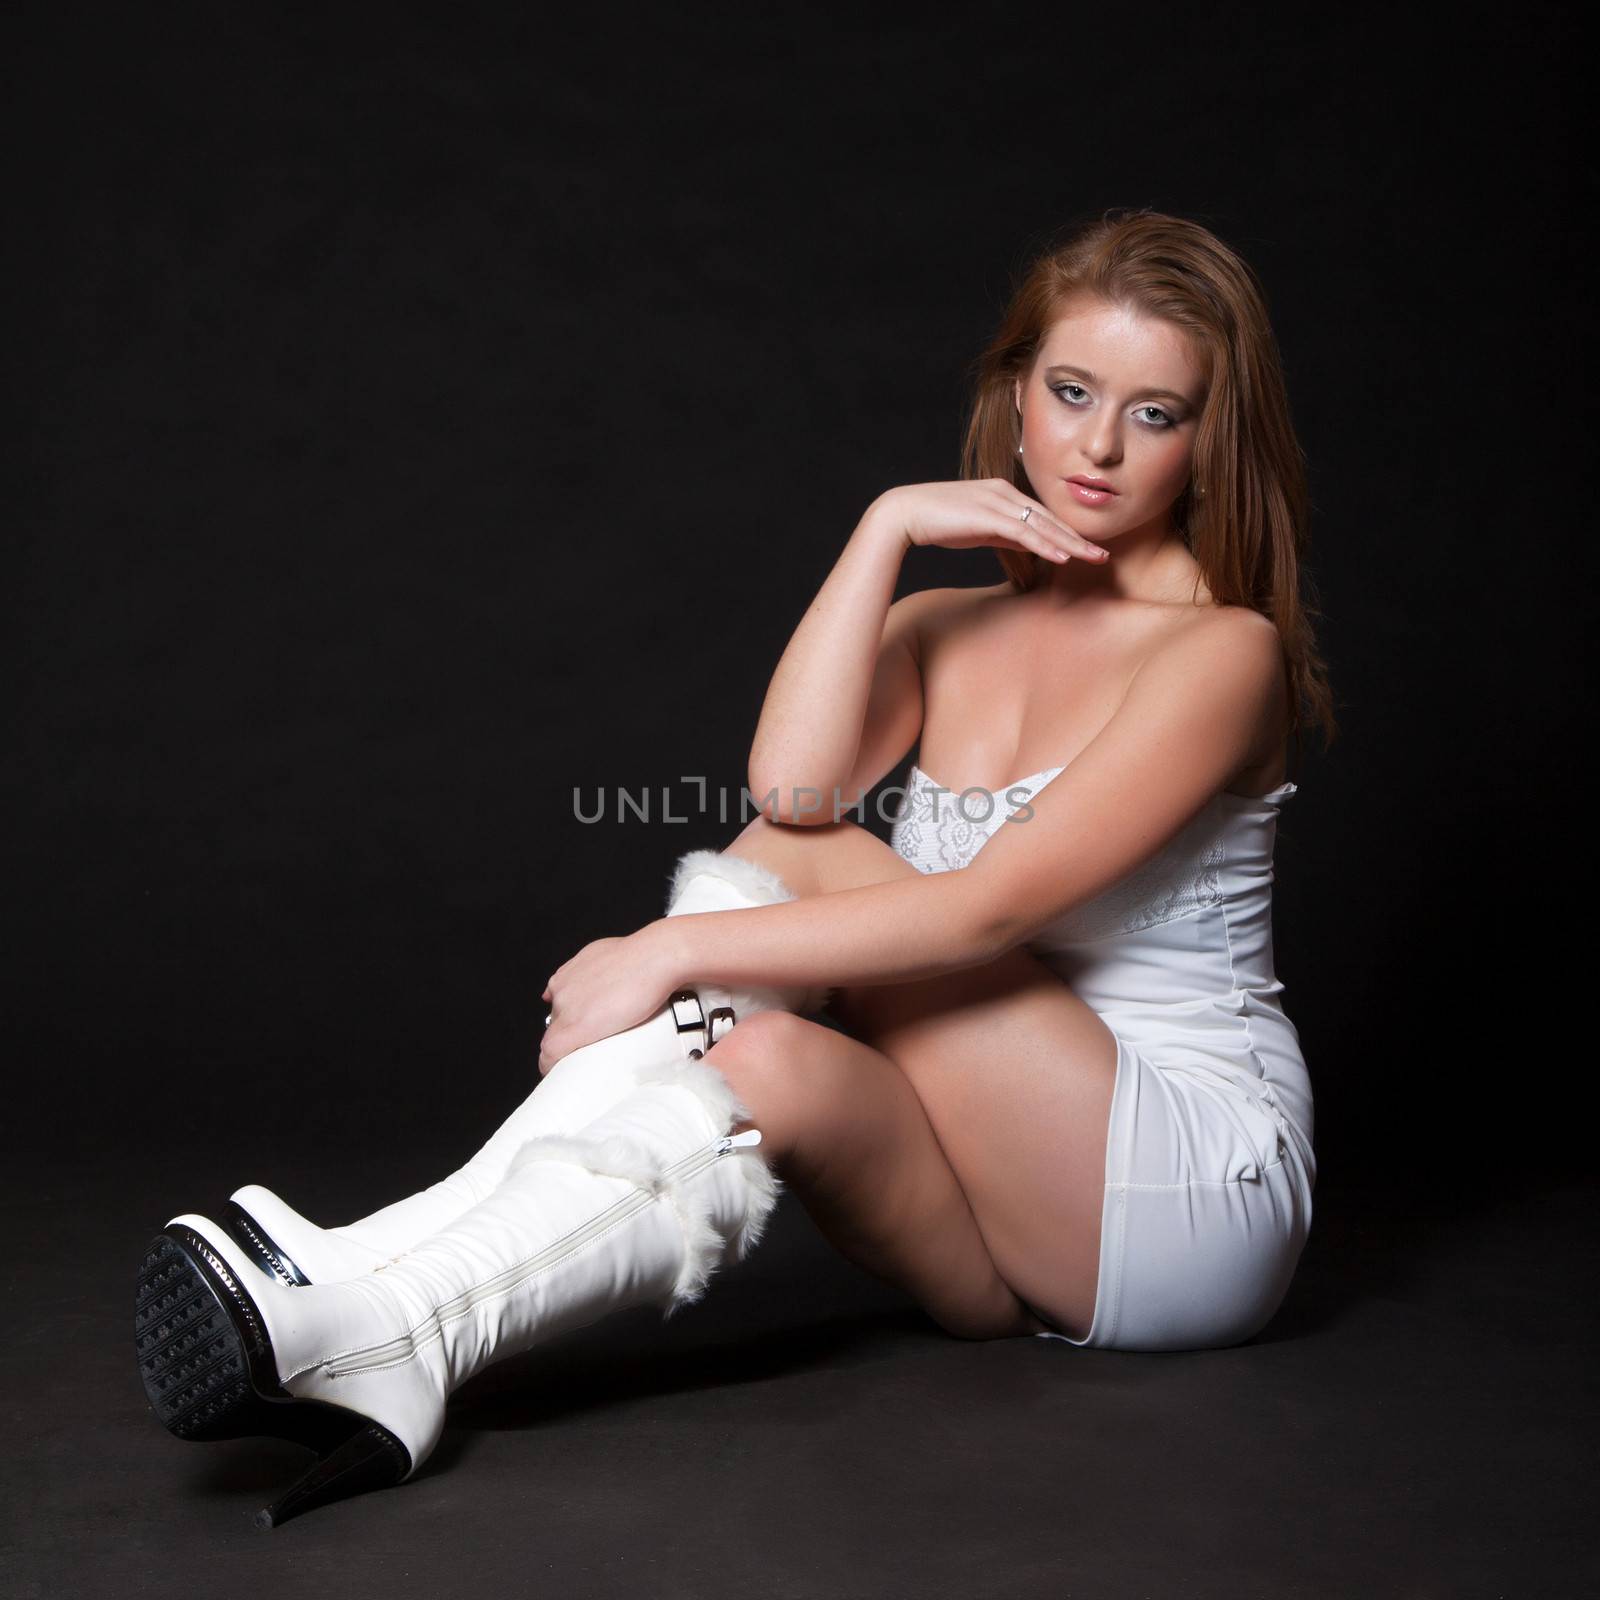 Young fashion model in a white mini dress sitting on the floor and looking up with a dreamy look on a black background